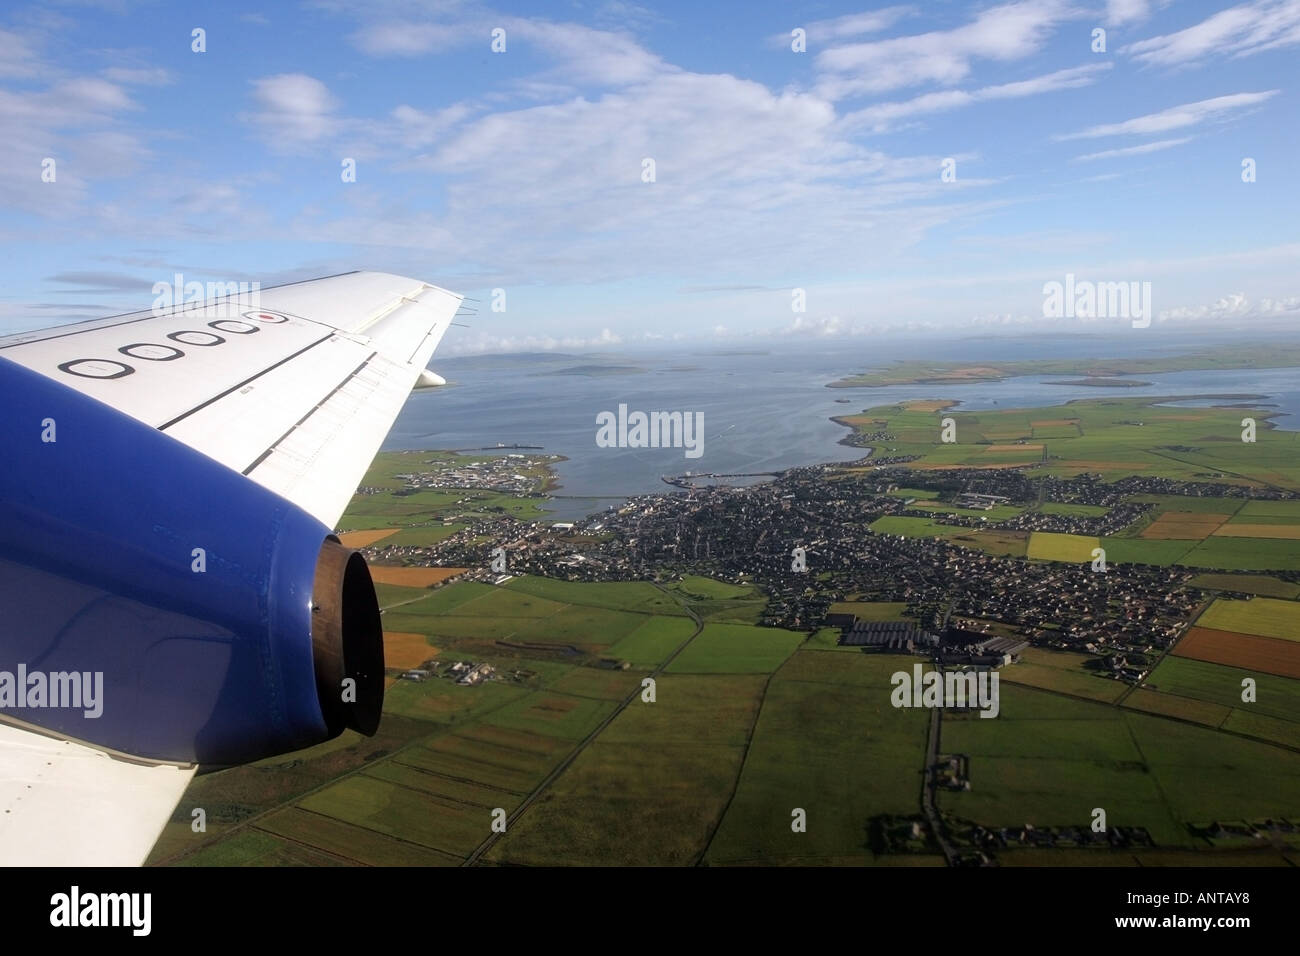 The town of Kirkwall on Orkney as seen after take off from Kirkwall airport through the window of a British Airways aircraft Stock Photo